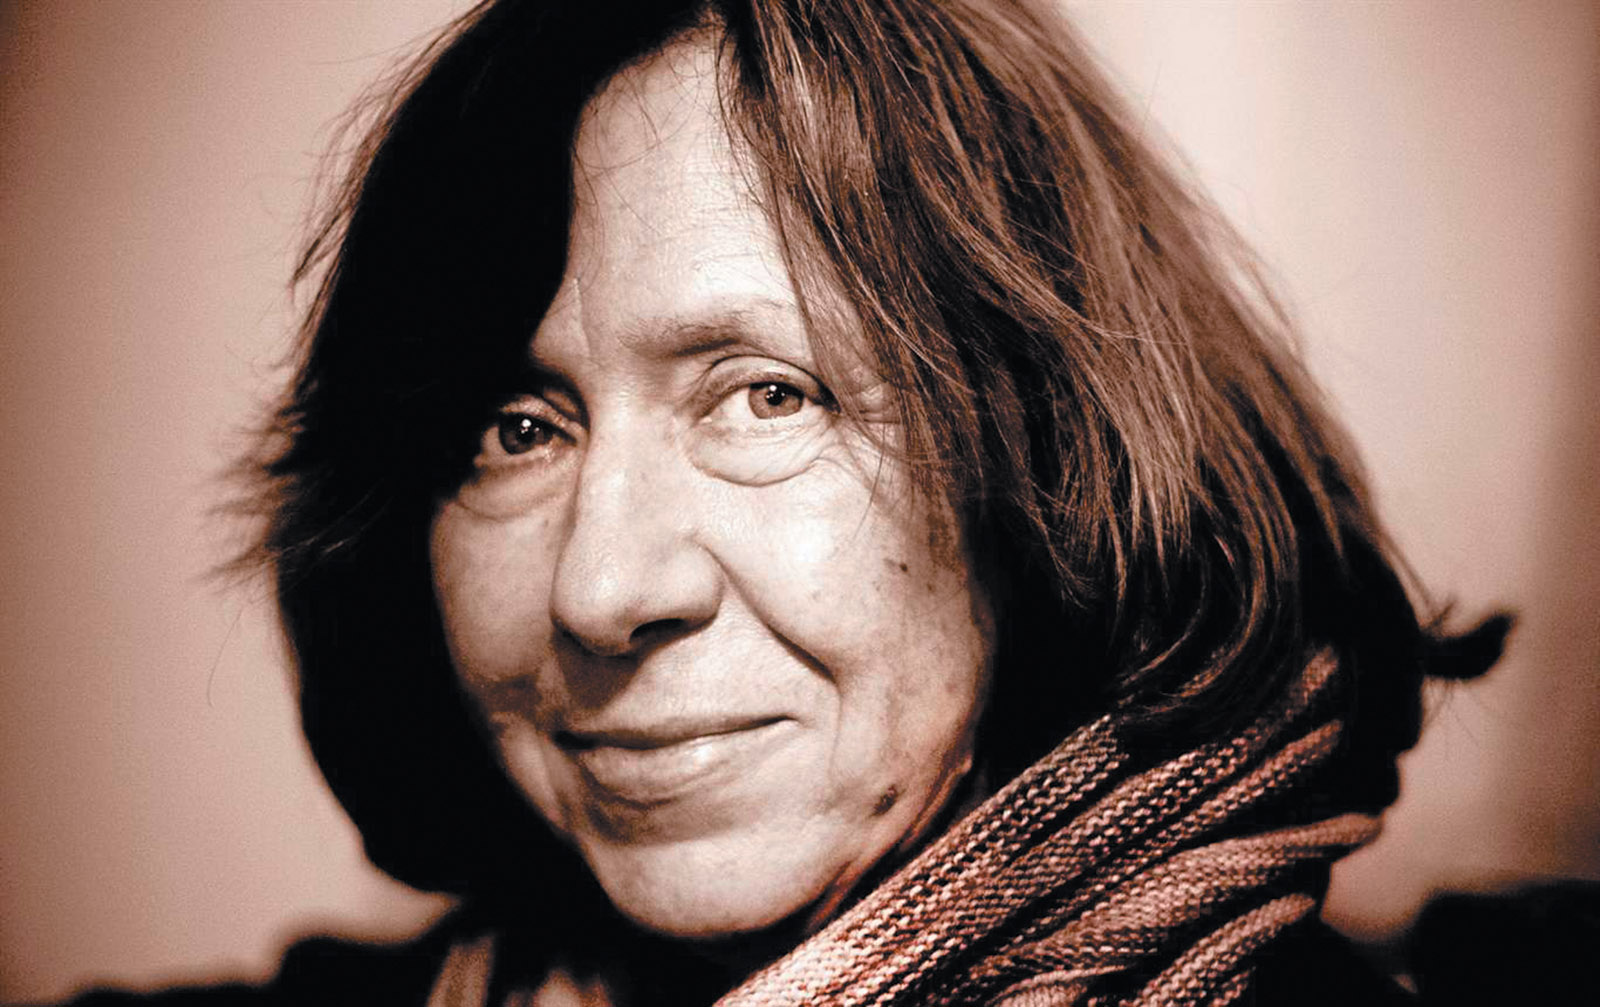 Alexievich’s New Kind of History